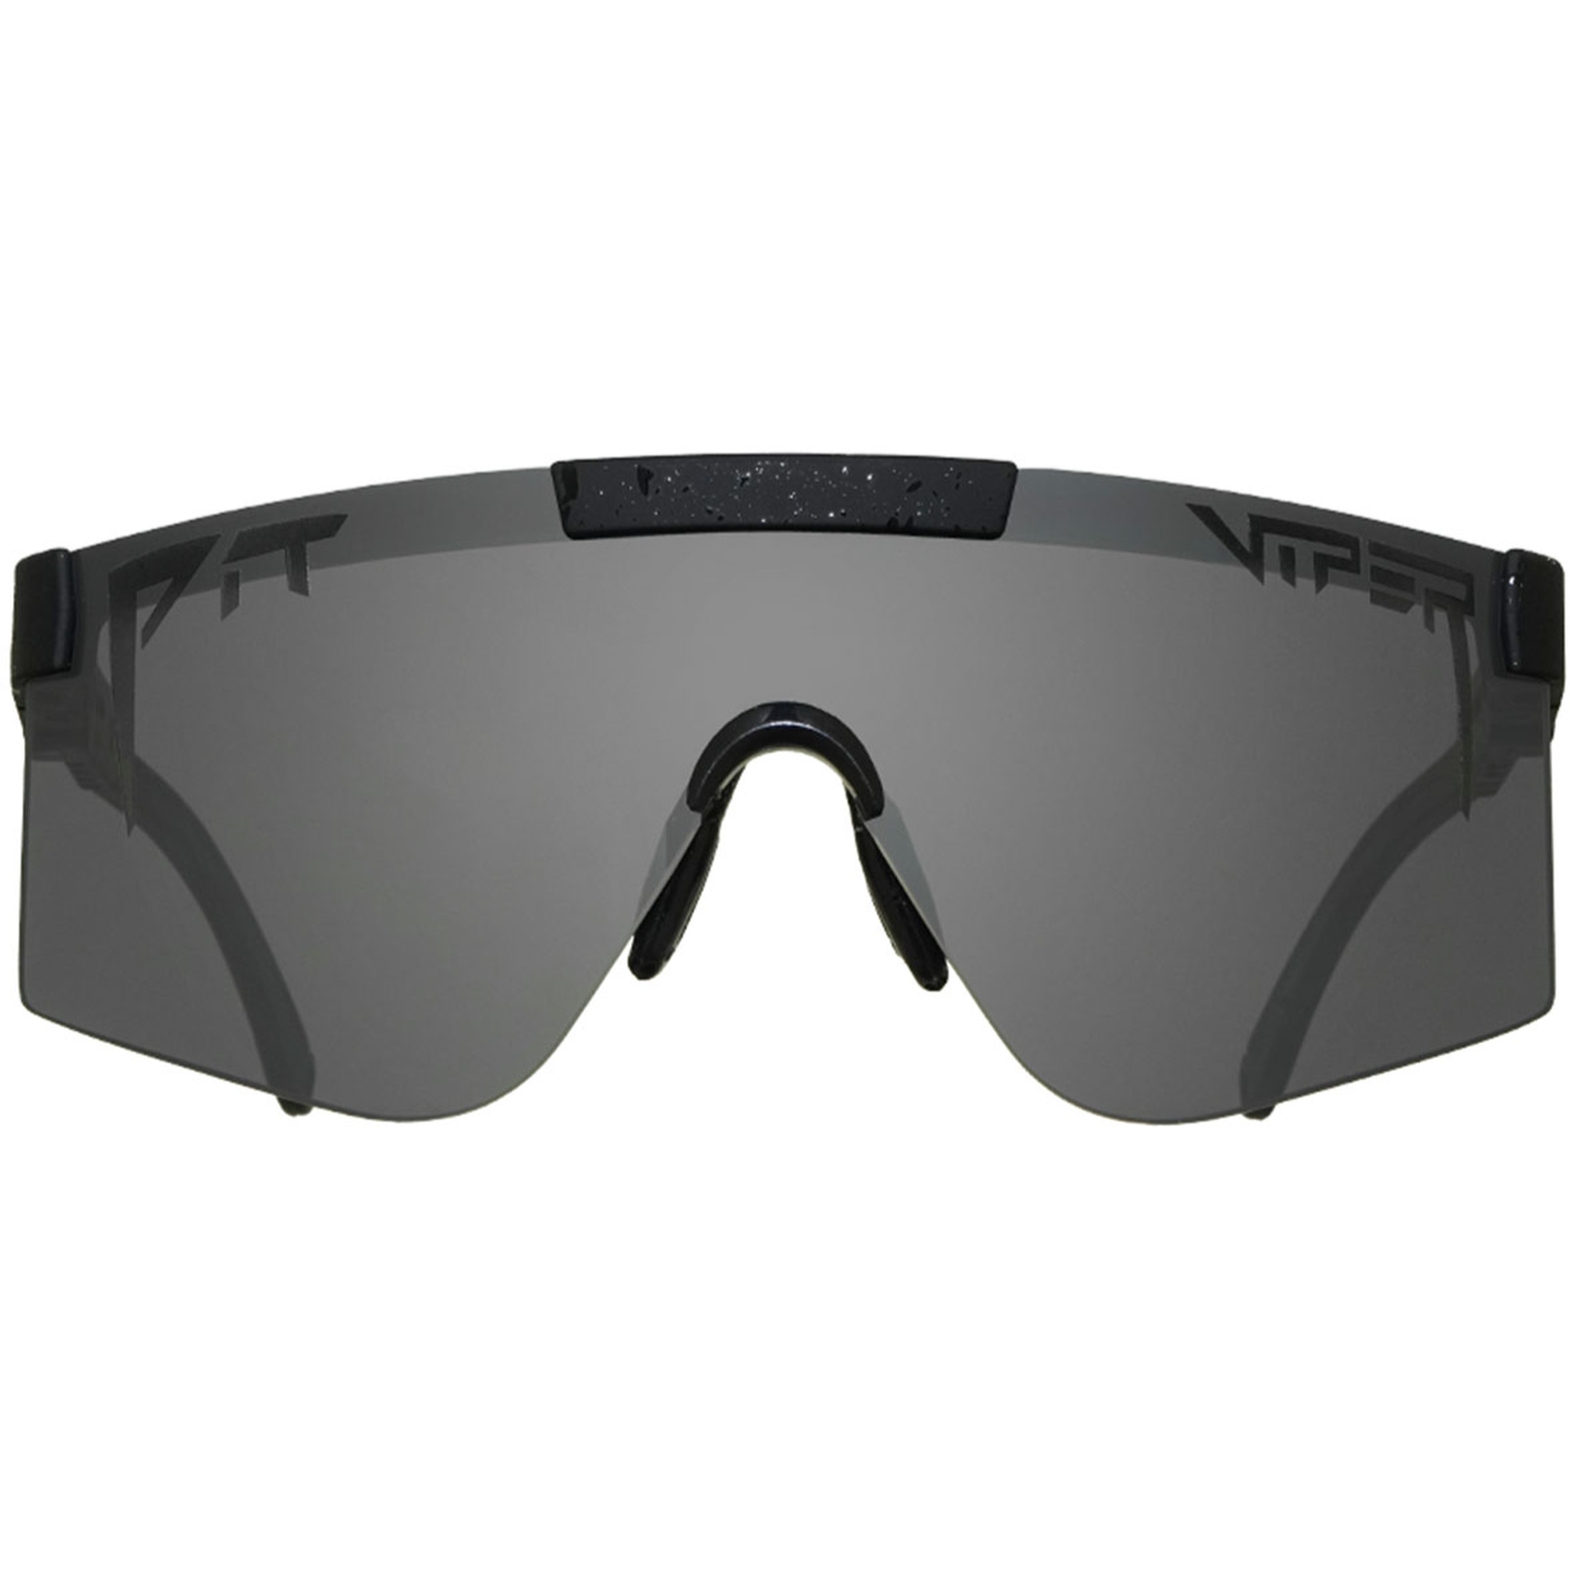 Productfoto van Pit Viper The 2000s Bril - The Blacking Out / Polarized Smoke Mirror